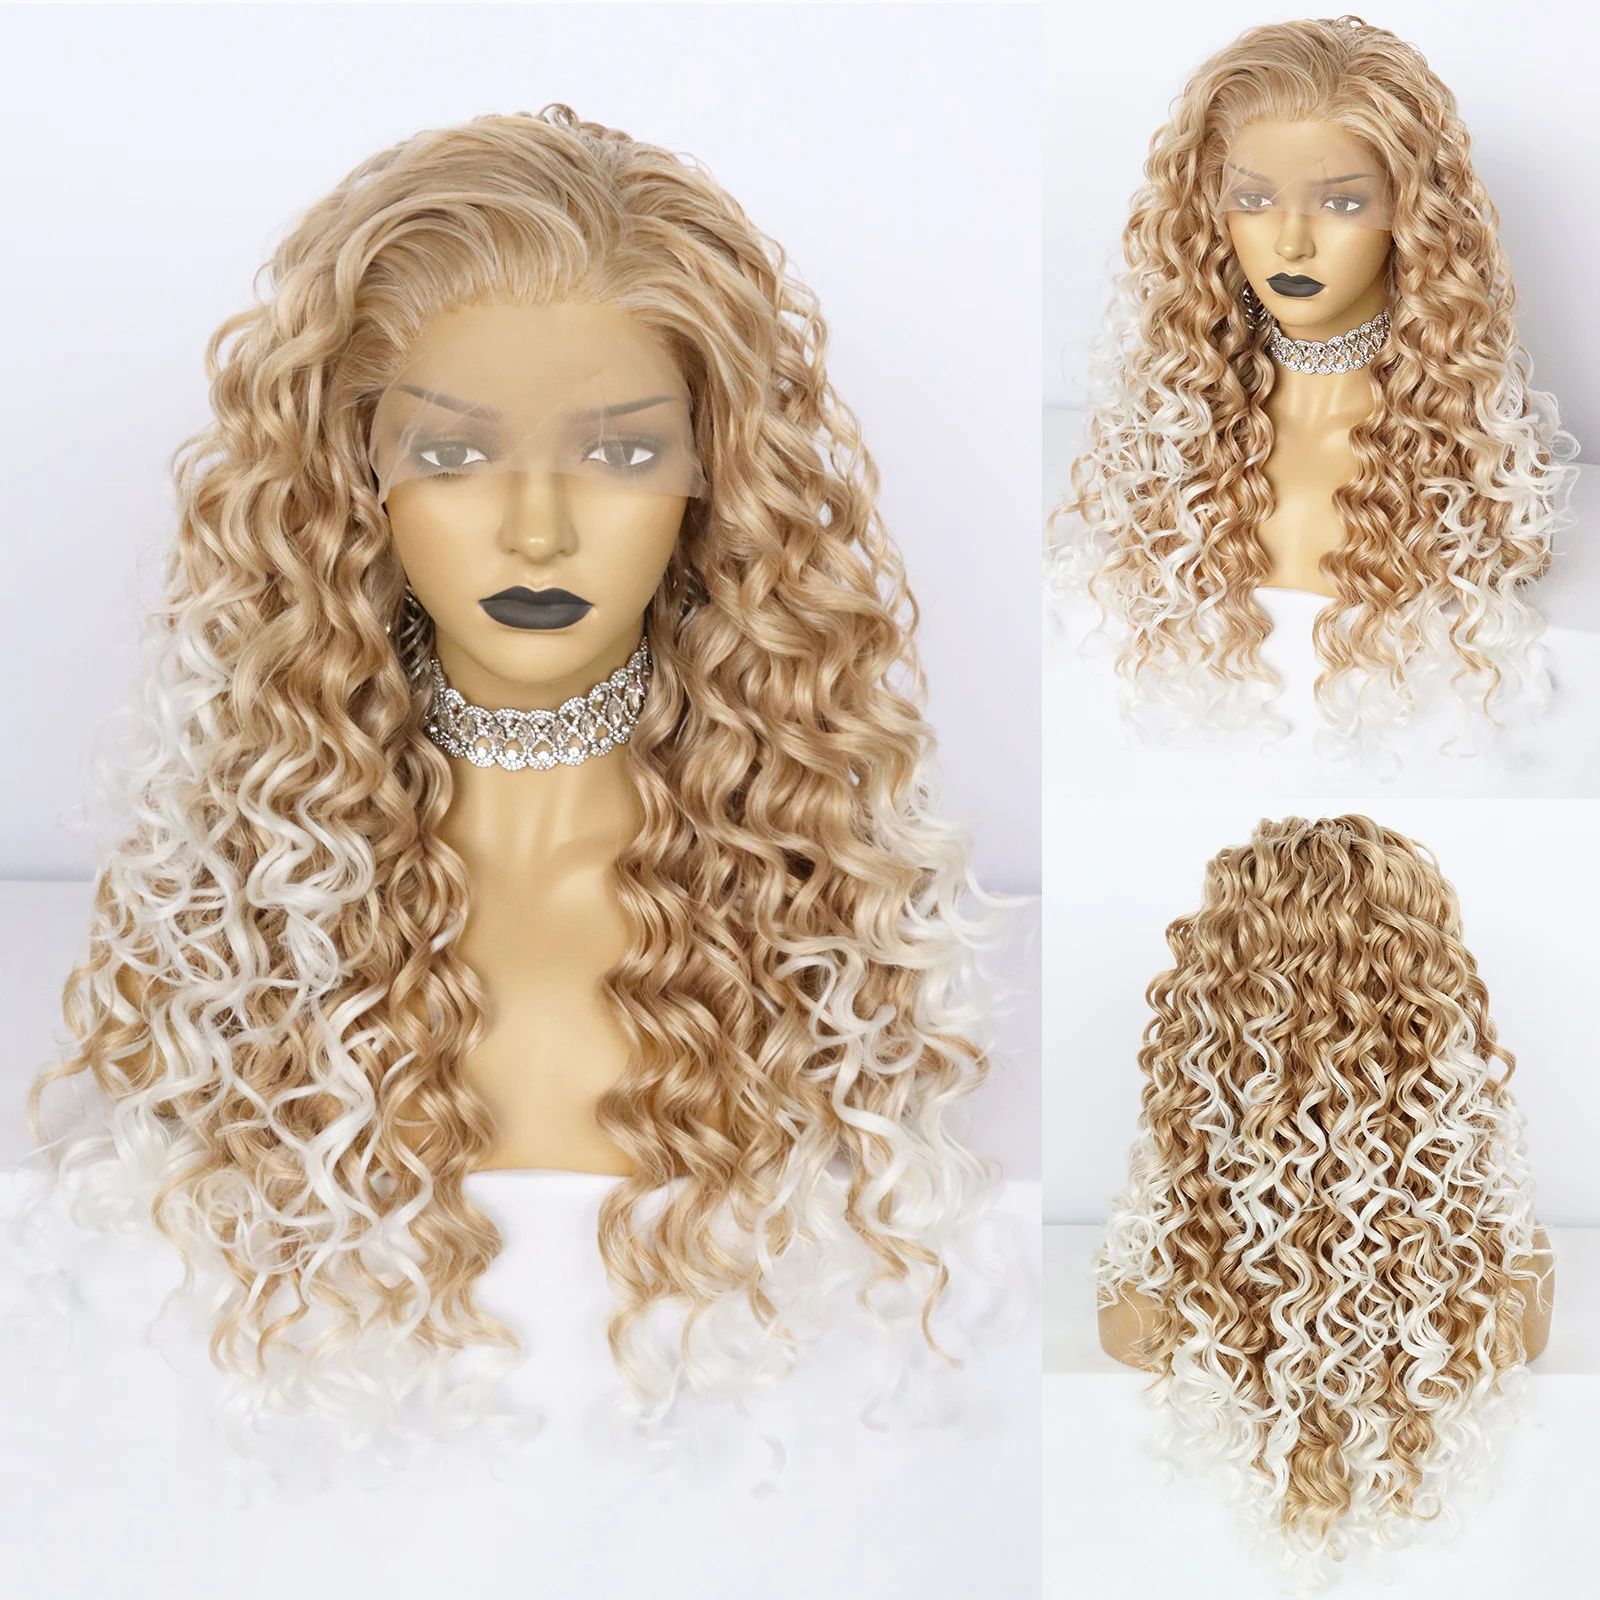 27inch Lace Front Wig Heat Resistant Synthetic Wig Brown Deep Wave Curly Long Fiber Hair for Black Women Cosplay Party Gift